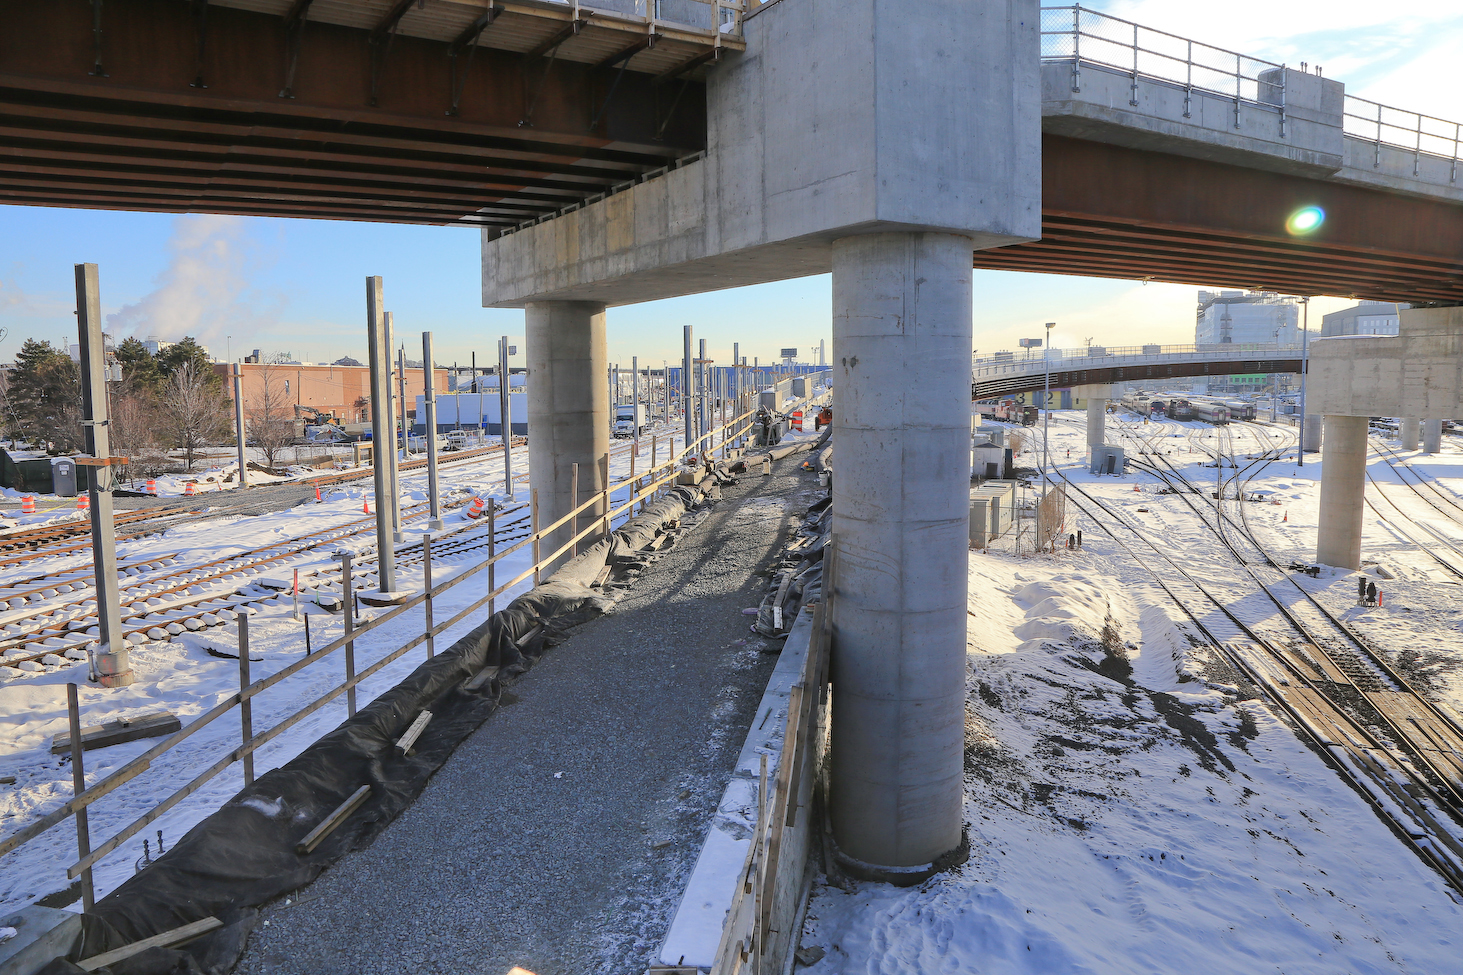 A close-up feature of what is show in the image above this one, the eastbound Union Square Branch viaduct, shown here under construction, narrowly threads between pier columns of the main Lechmere Viaduct. (Image courtesy of GLX Constructors) 